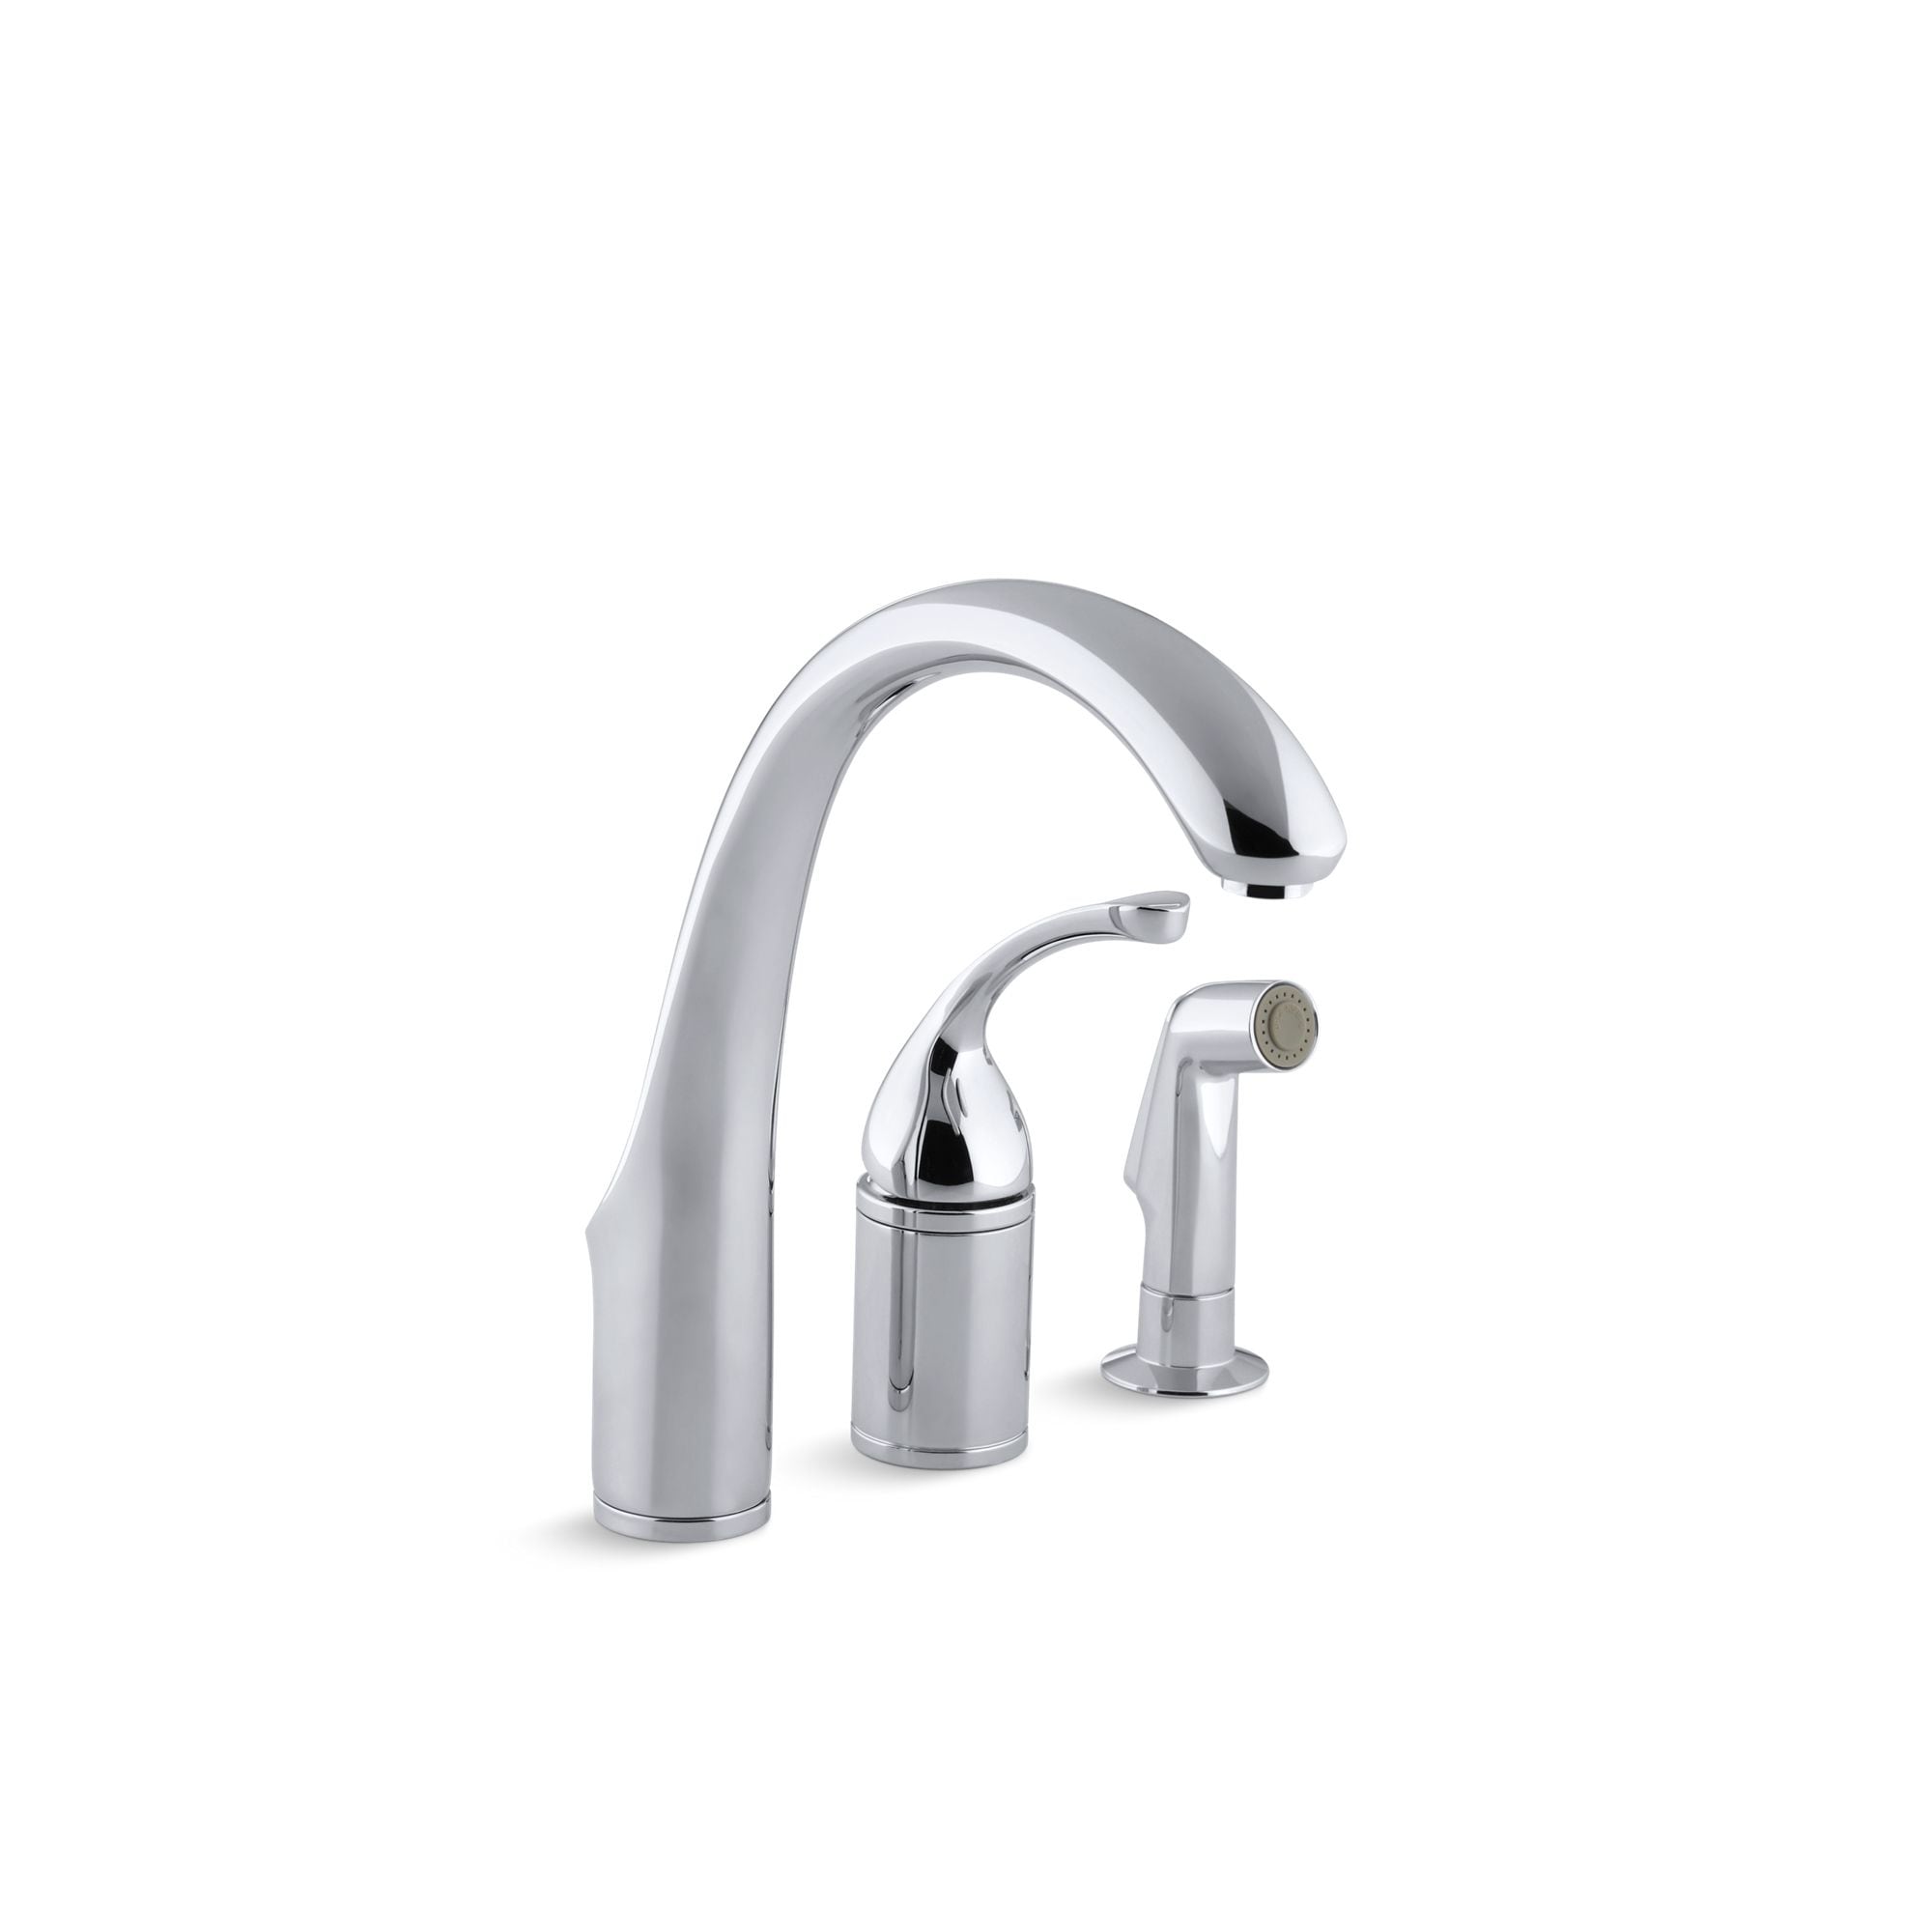 Kohler Fort 3 Hole Remote Valve Kitchen Sink Faucet With 9 Spout With Matching Finish Sidespray K 10430 Cp Overstock 31312602